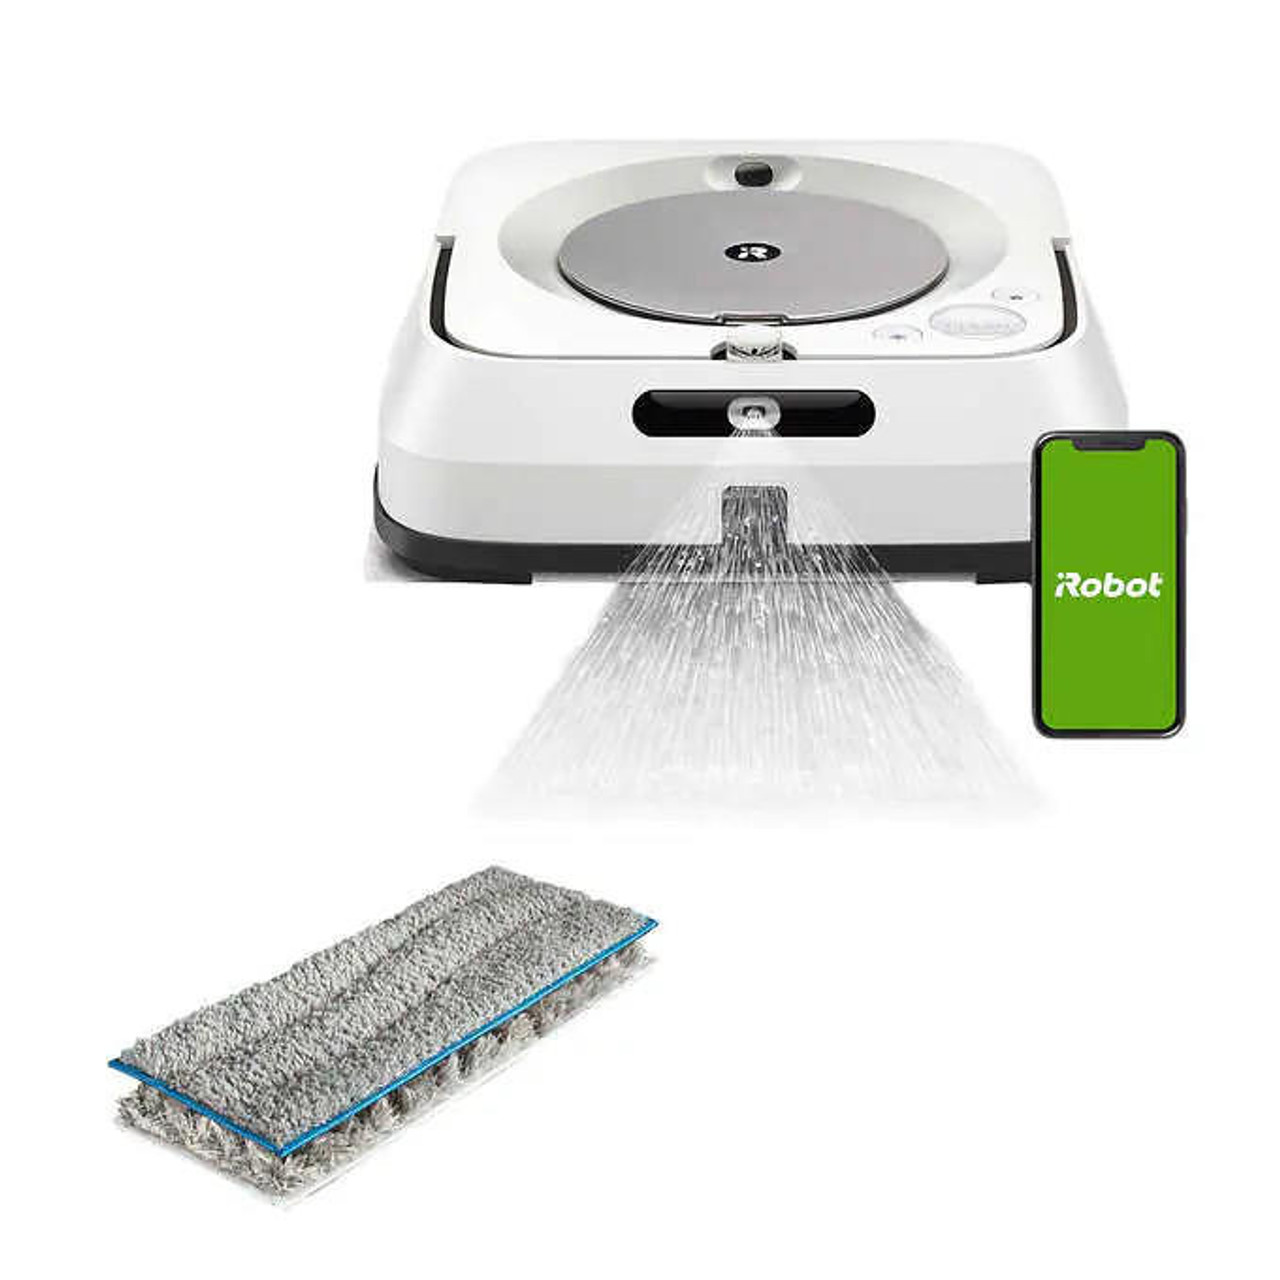 iRobot Braava Jet M6 Robot Mop with 2 Bonus Mop Pads - Precision Jet Spray, Smart Mapping, and Auto-Recharge
-Chicken Pieces